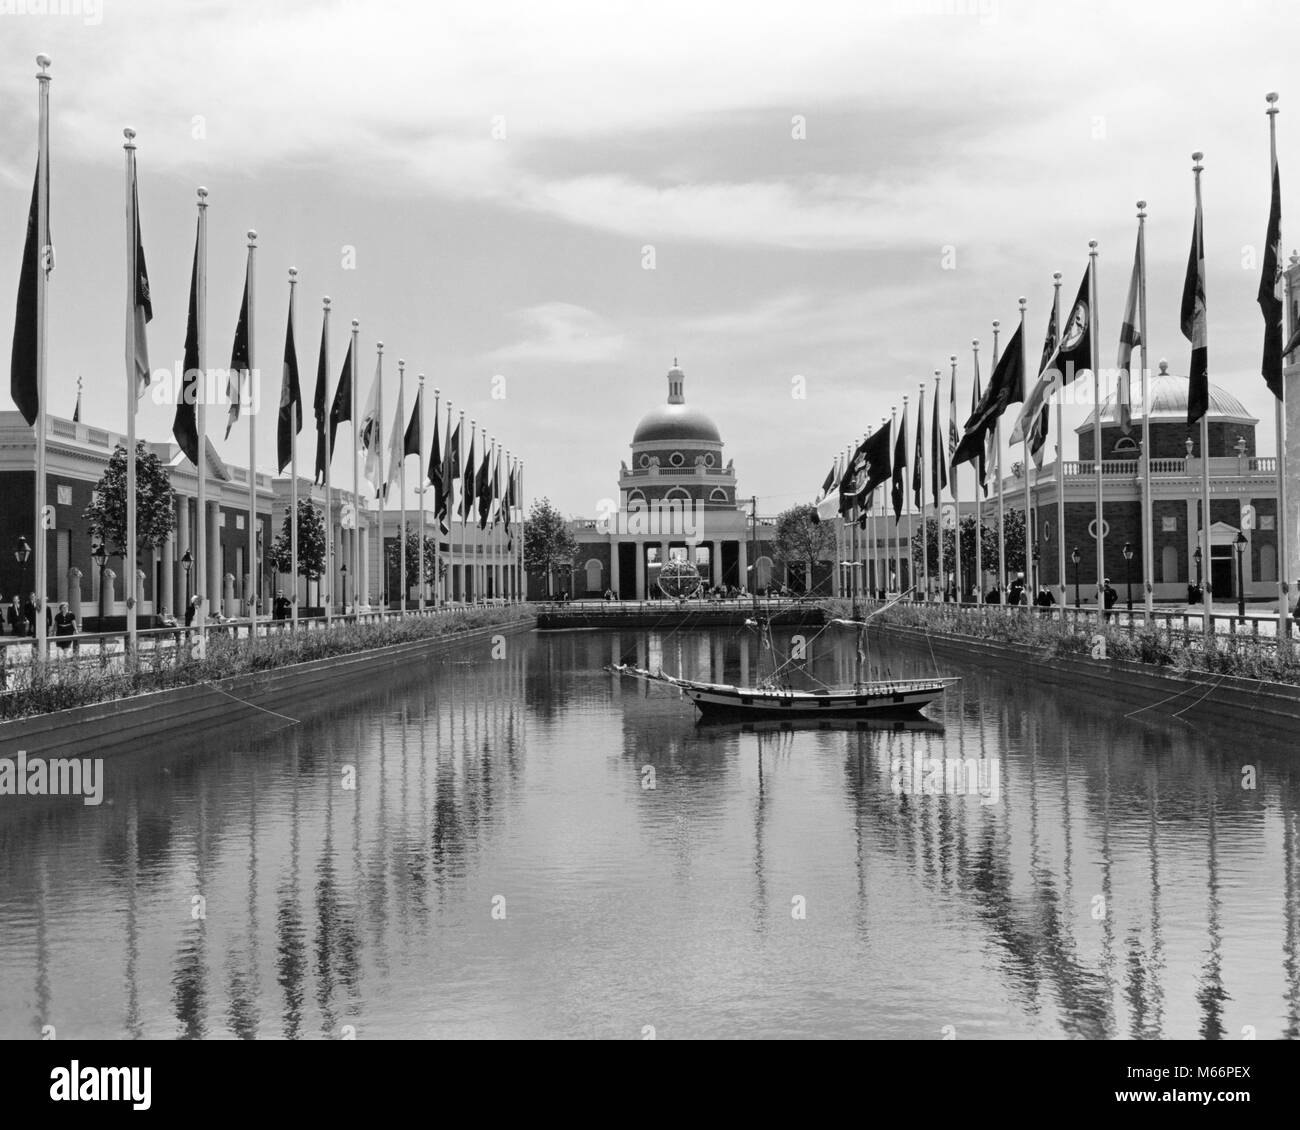 1930s 1939 WORLD'S FAIR COURT OF STATES NEW YORK CITY NY USA - r1382 PAL001 HARS BLACK AND WHITE COURT OF STATES EXPO EXPOSITION OLD FASHIONED Stock Photo